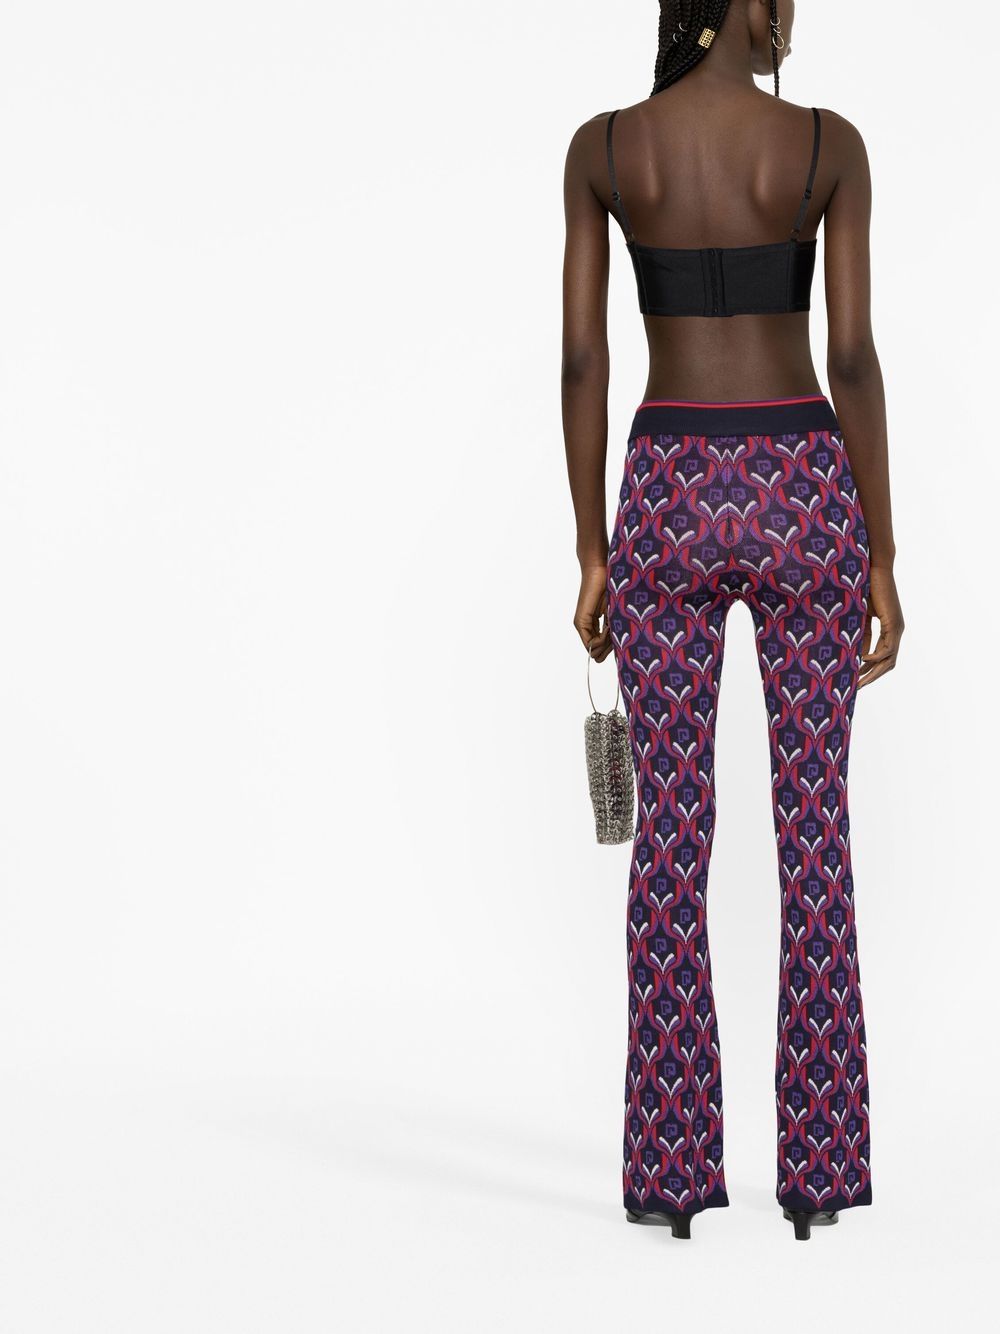 Patterned flare trousers COLOUR black  RESERVED  3508S99X